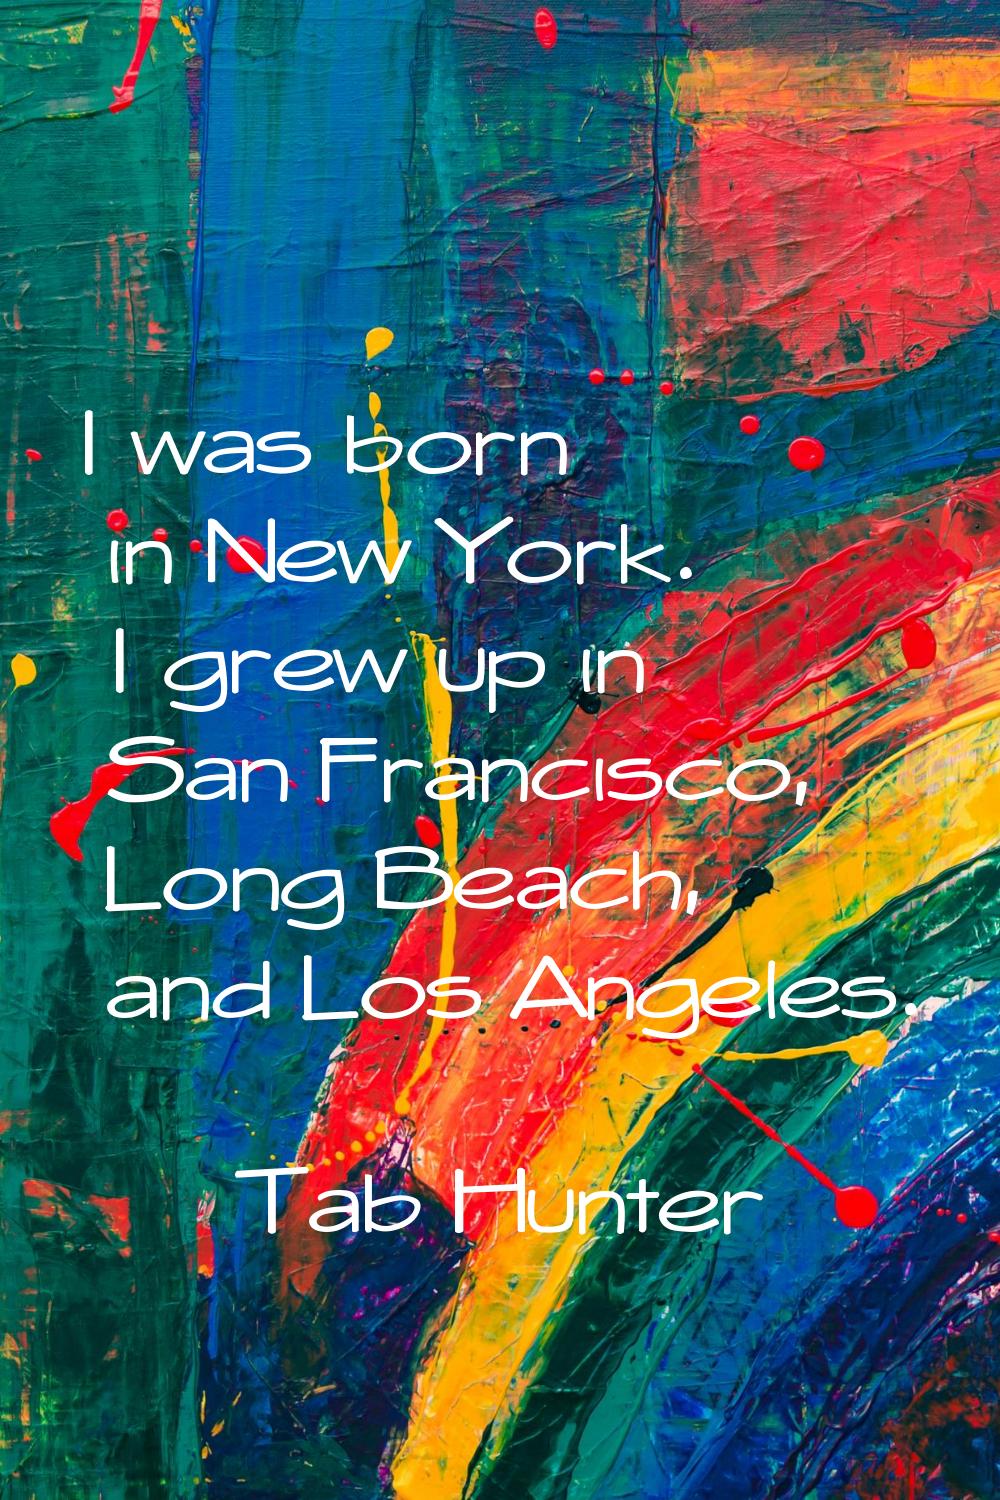 I was born in New York. I grew up in San Francisco, Long Beach, and Los Angeles.